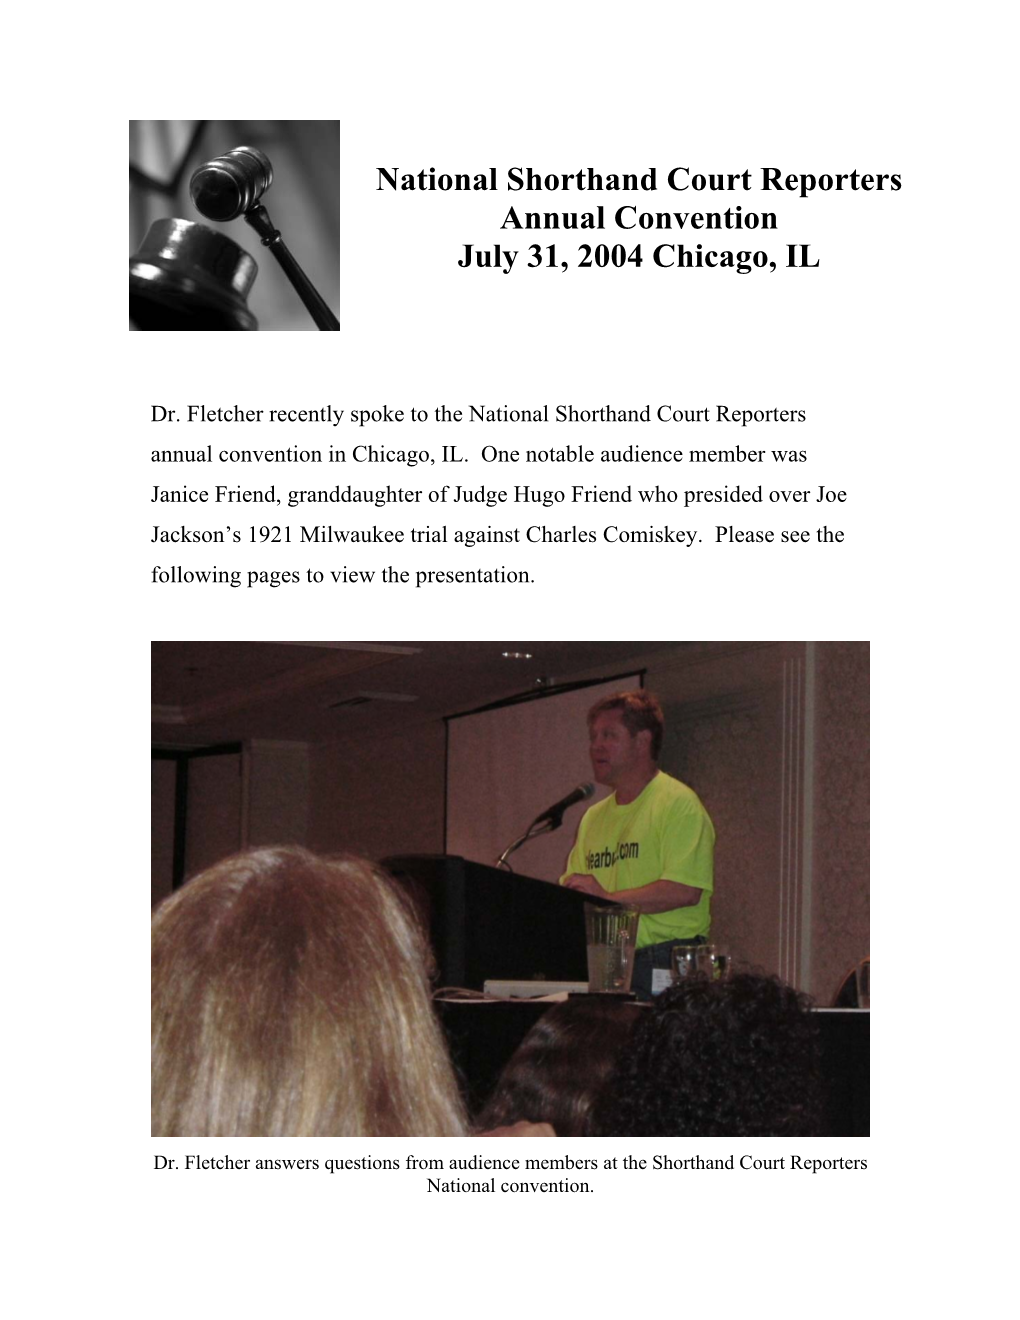 National Shorthand Court Reporters Association